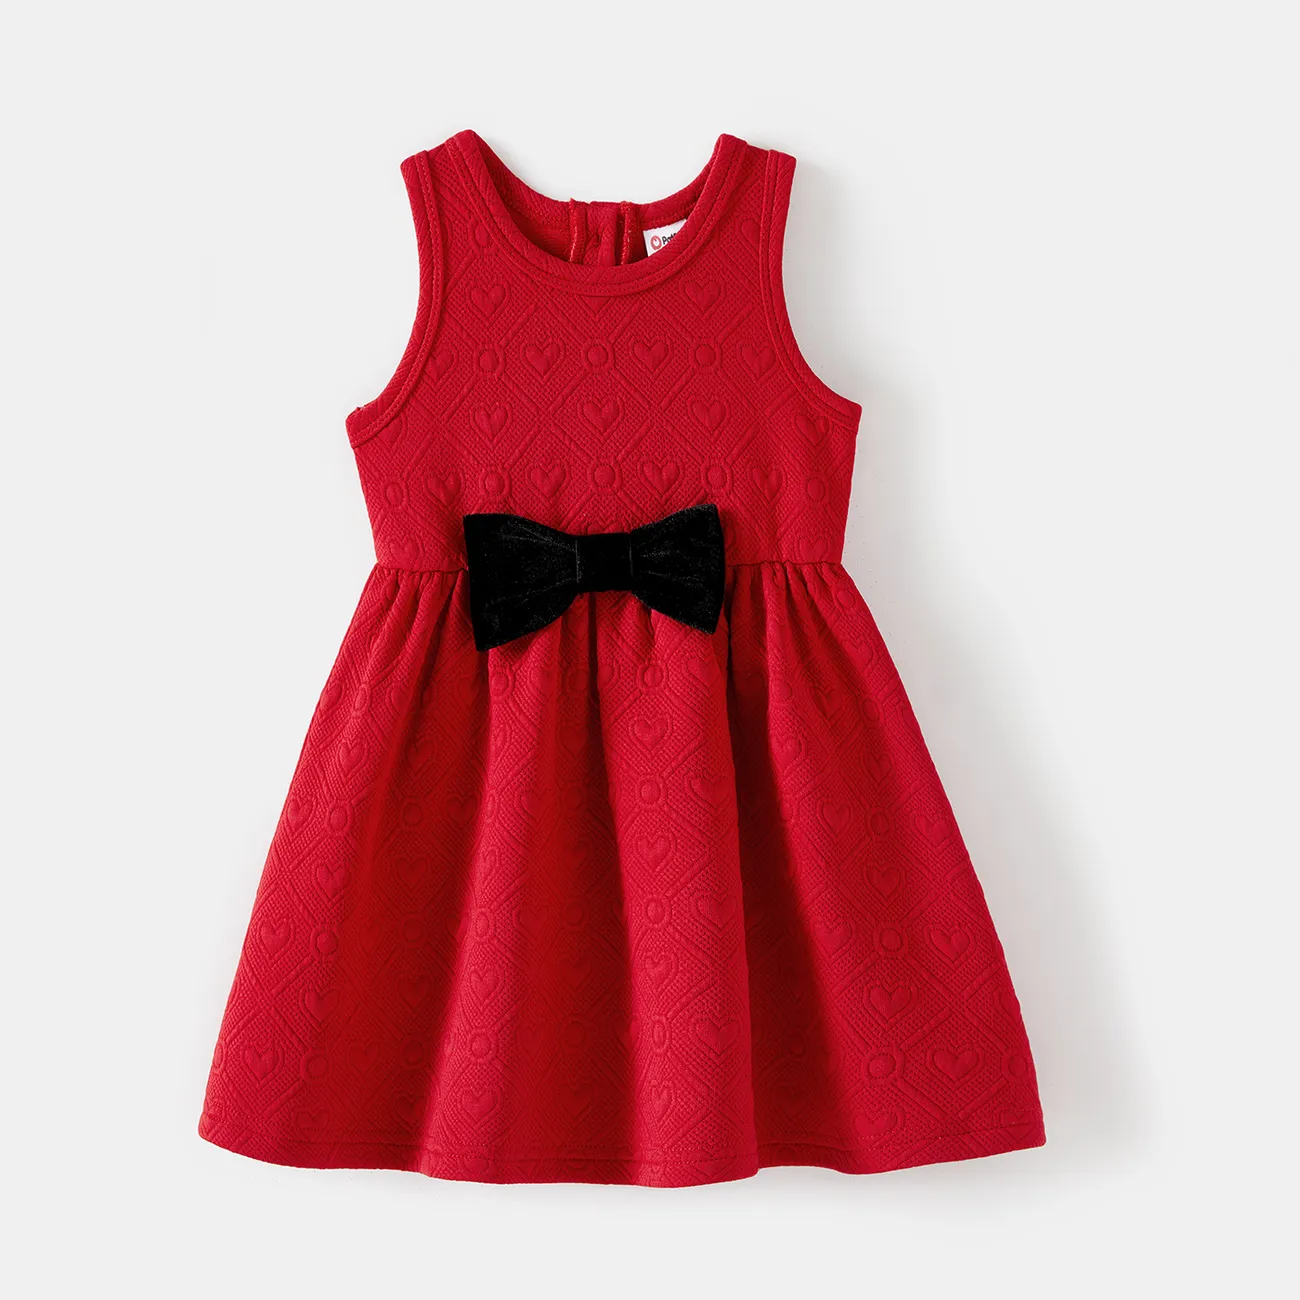 Family Matching Bow Front Red Heart Textured Tank Dresses and Long-sleeve Corduroy Shirts Sets Red big image 1